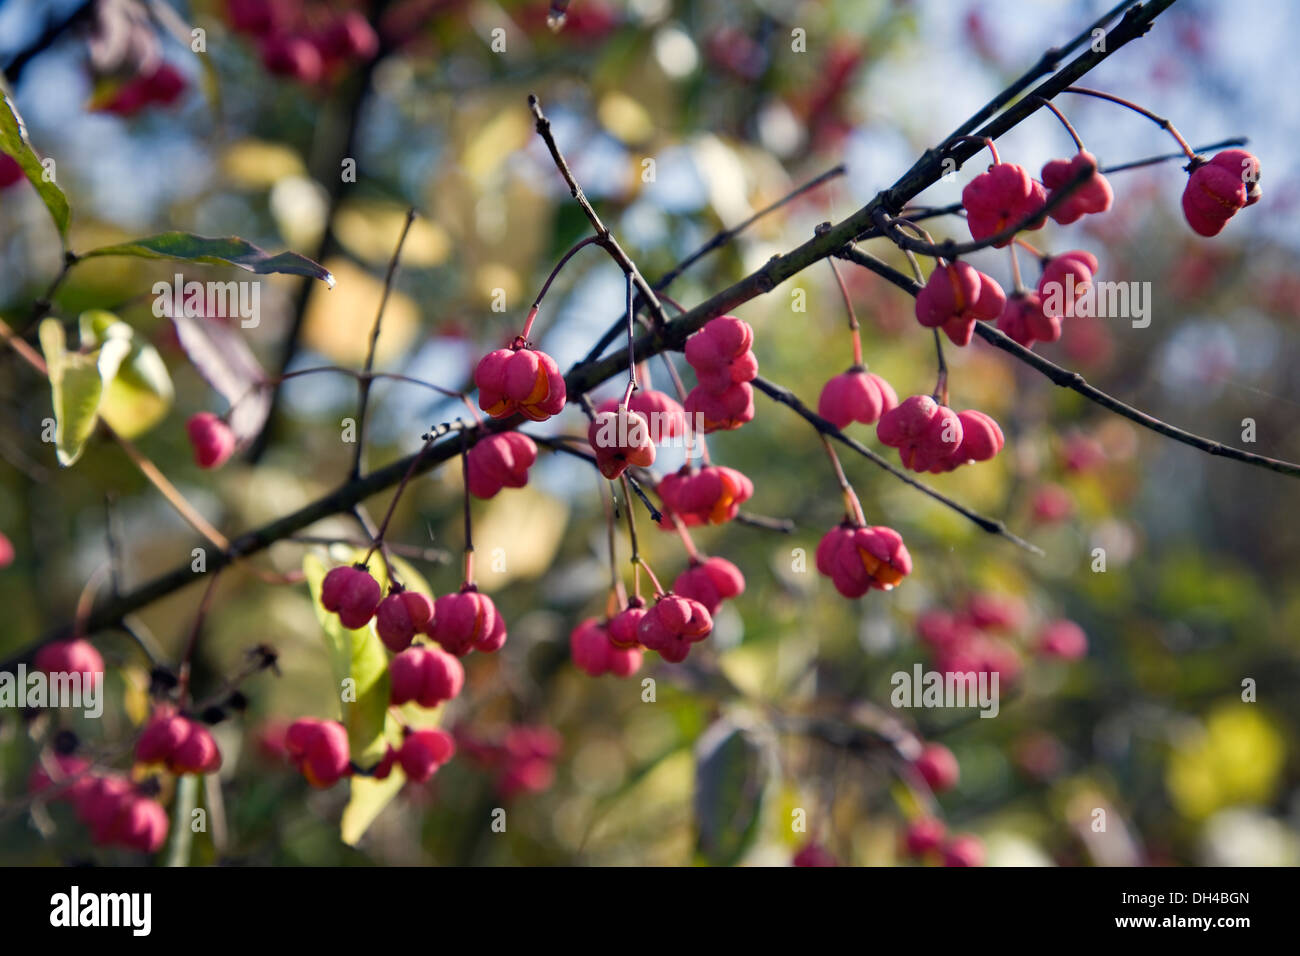 European spindle or common spindle (Euonymus europaeus) on fruits. Gorbeia Natural Park. Basque Country, Spain, Europe. Stock Photo